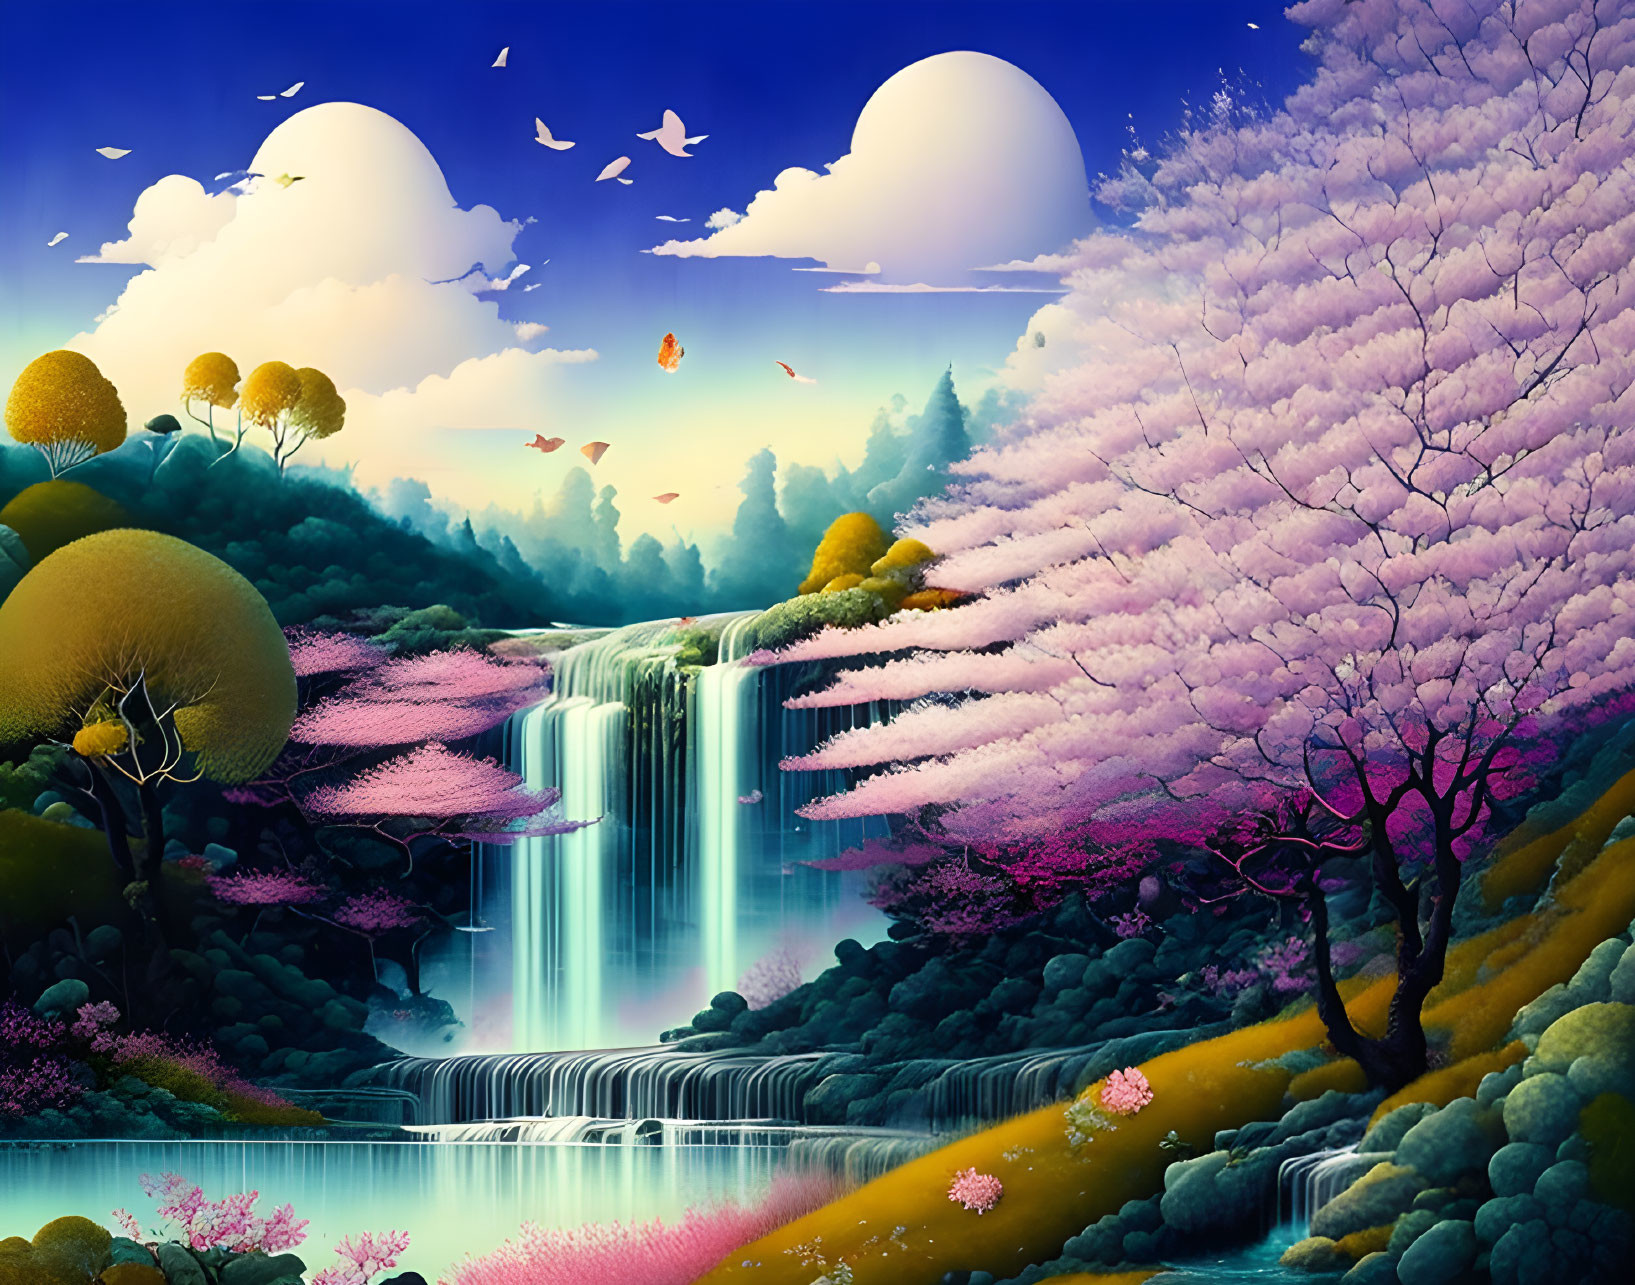 Fantasy landscape with pink cherry blossoms, waterfall, birds, whimsical trees, and serene blue